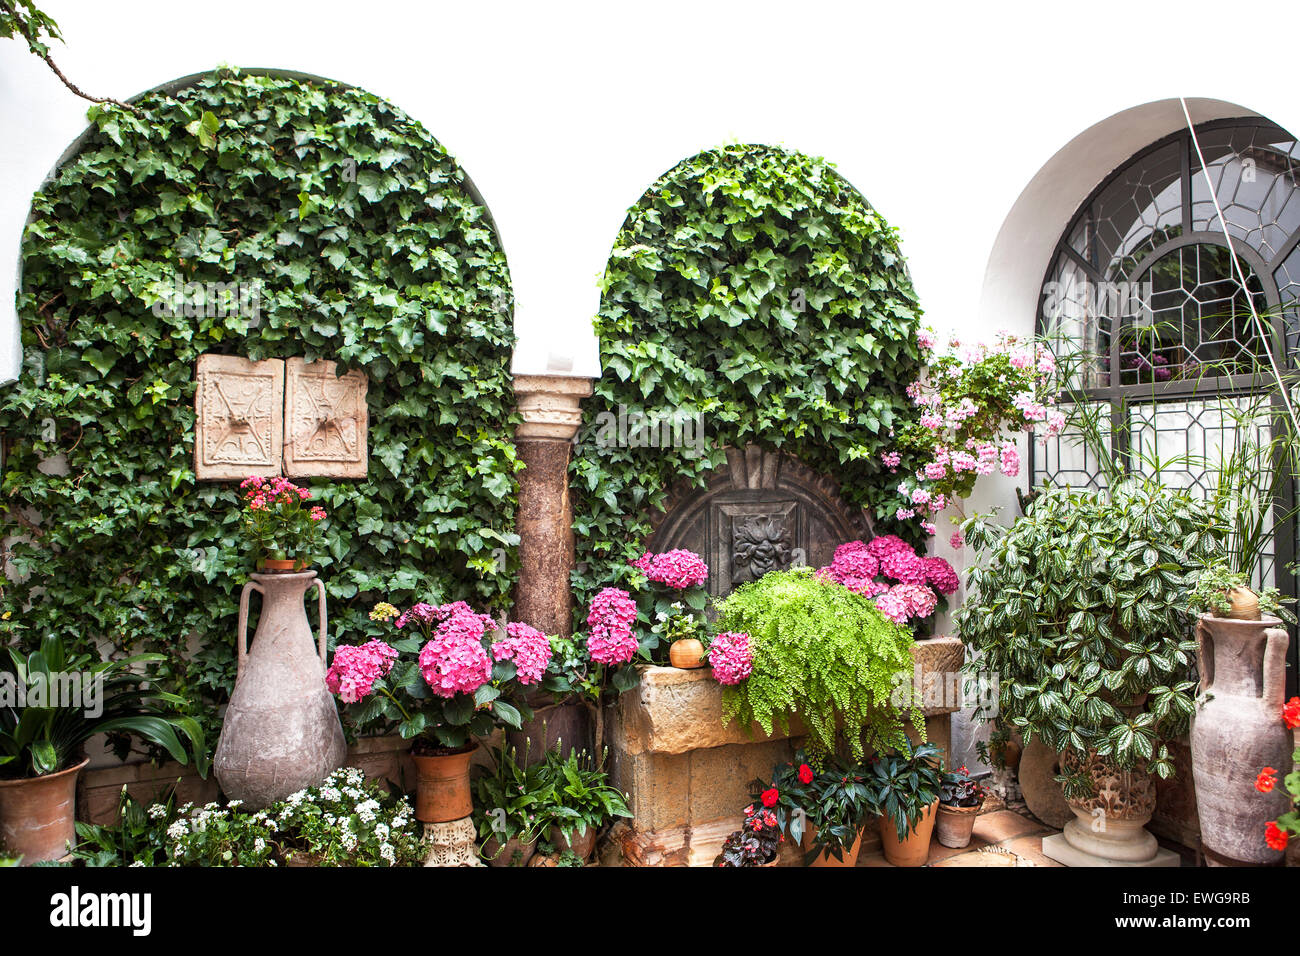 Spanish courtyard with arches architecture,  fountain, vases and flowers Stock Photo